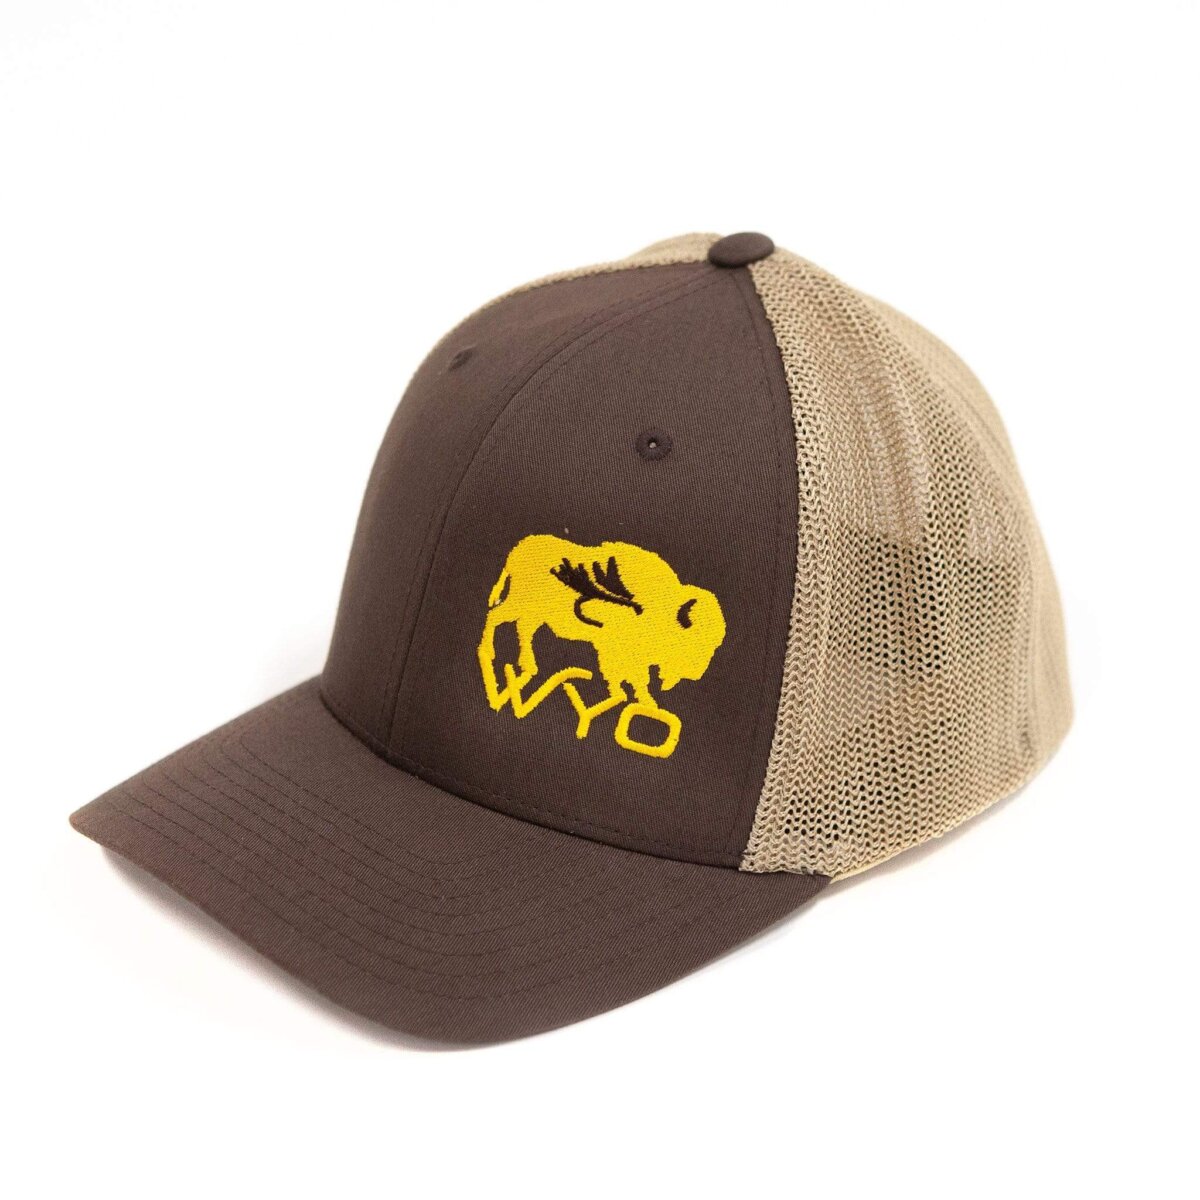 Mesh Wyo Wyoming and Brown Shop Flex-Fit Fly Gold Bison - Hat -